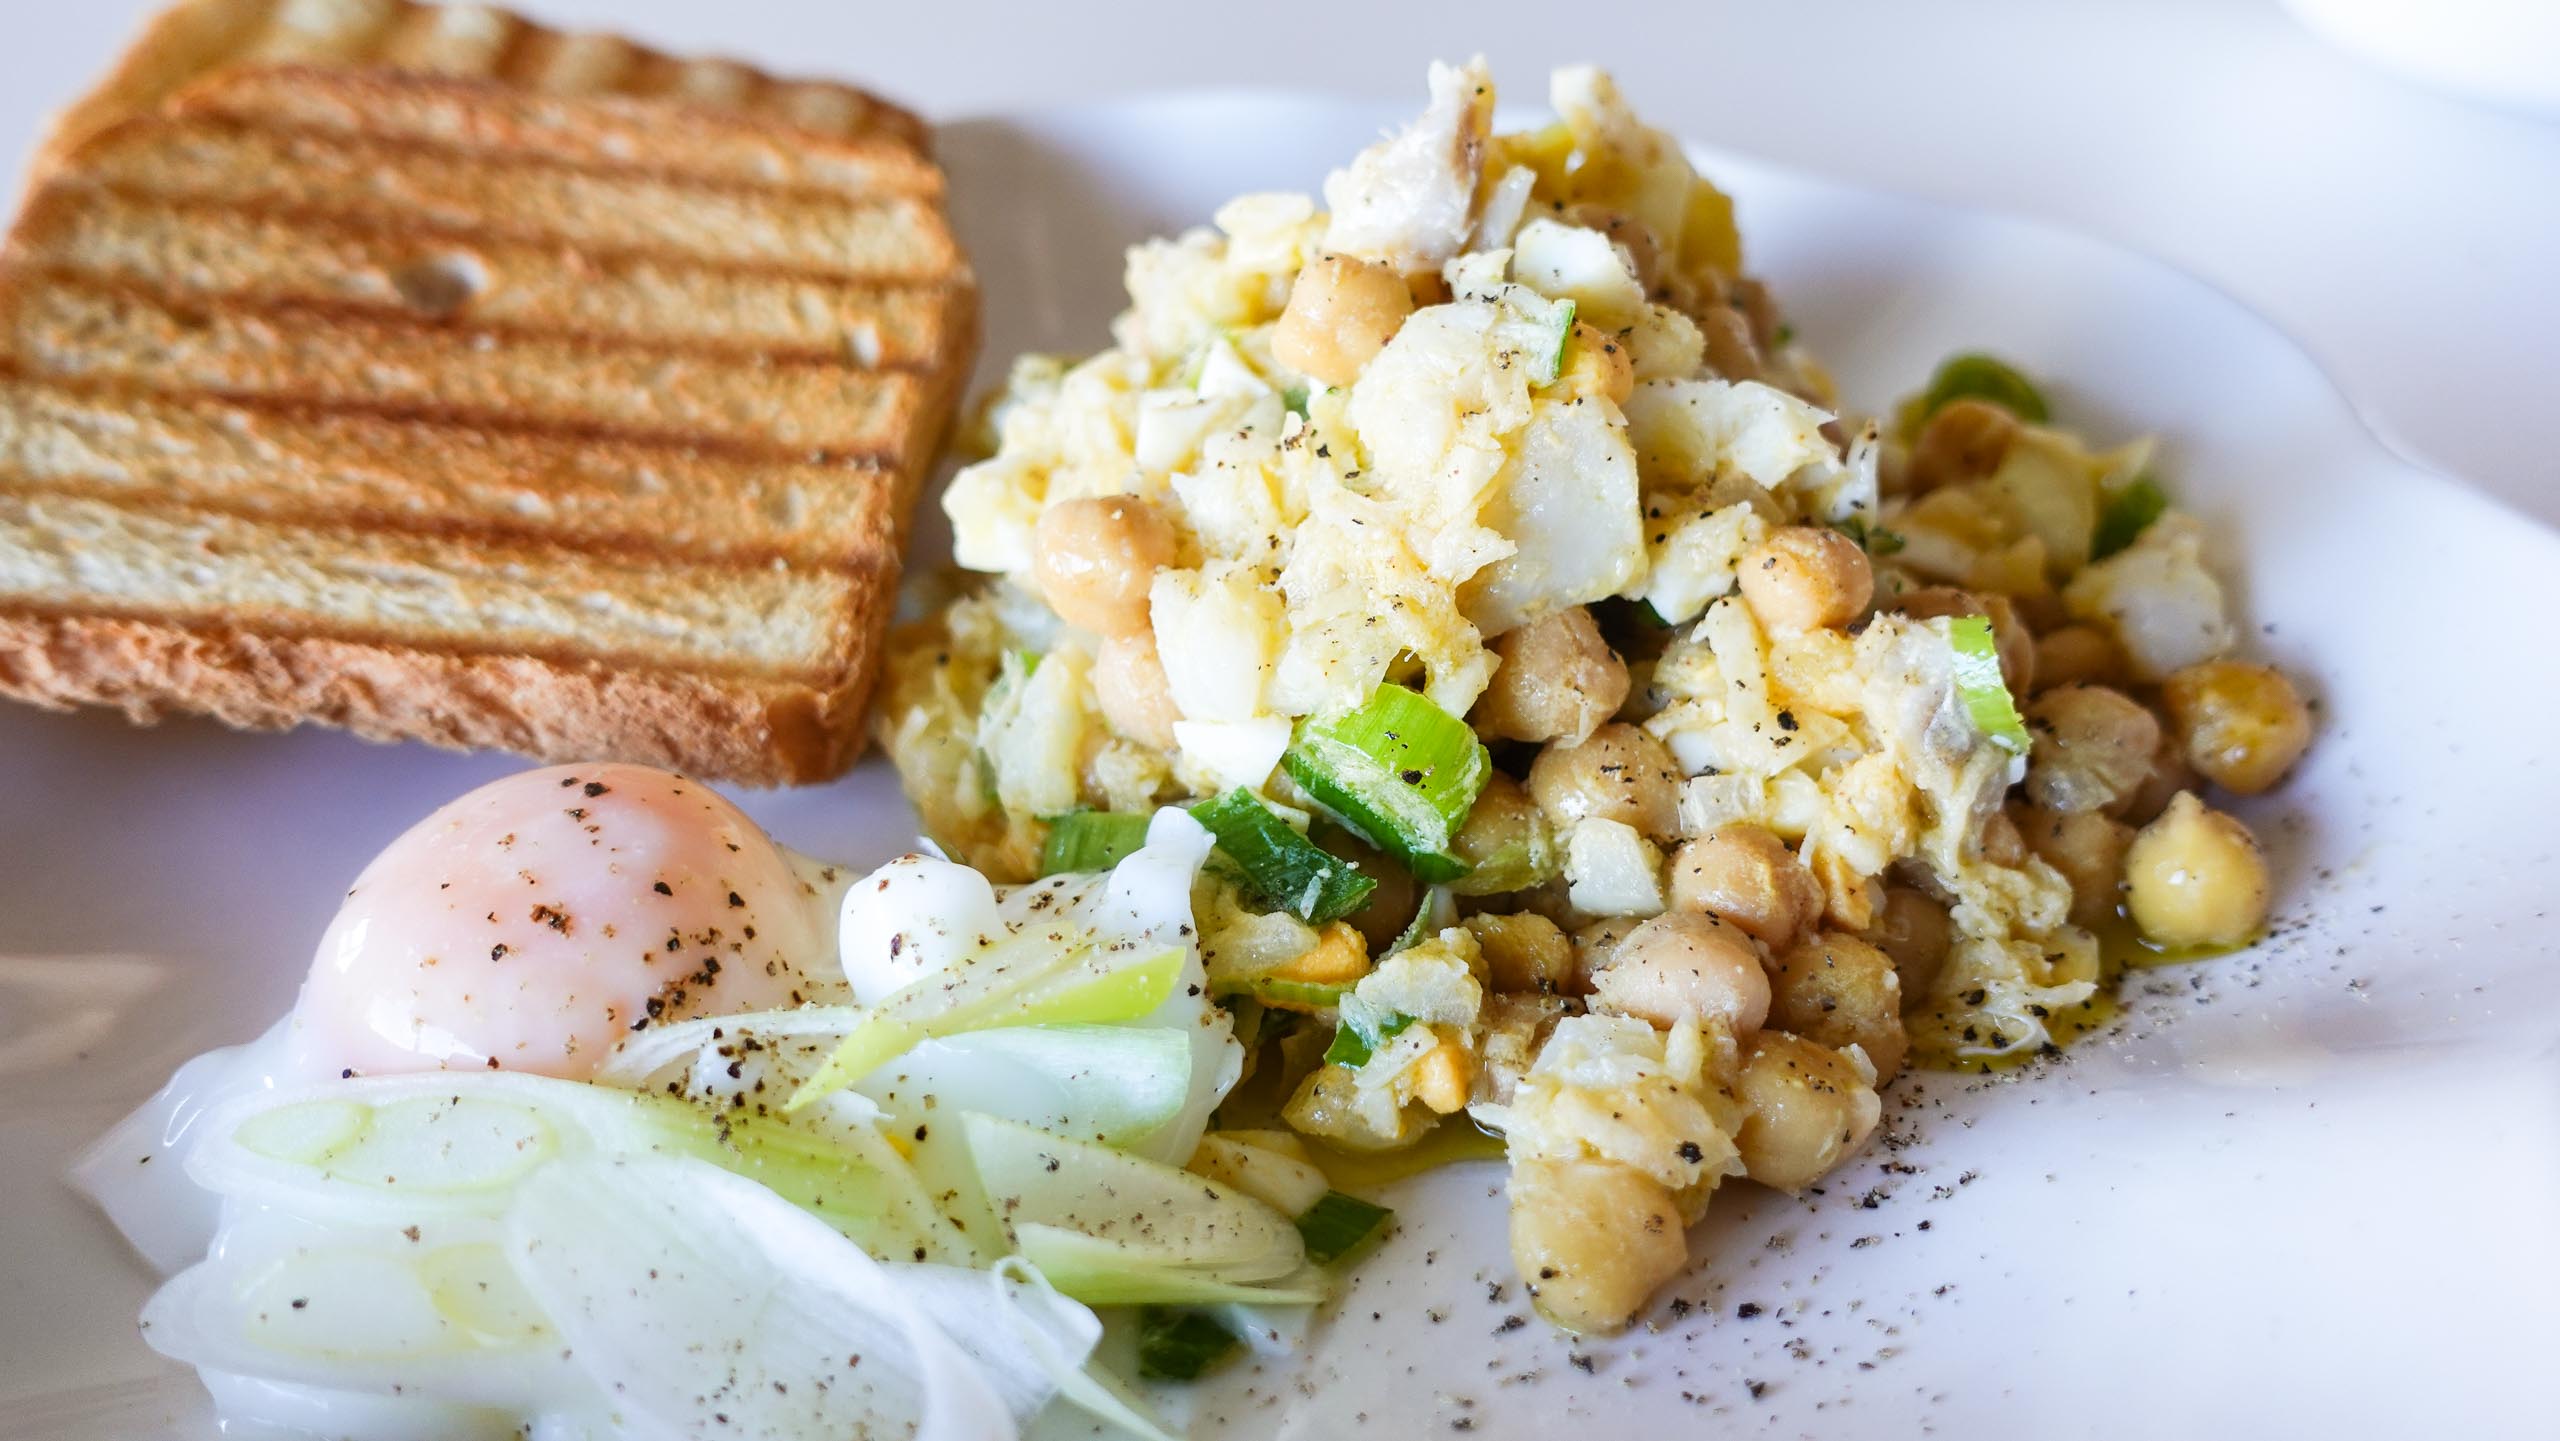 Chickpea Cod Salad with two crackers and one egg